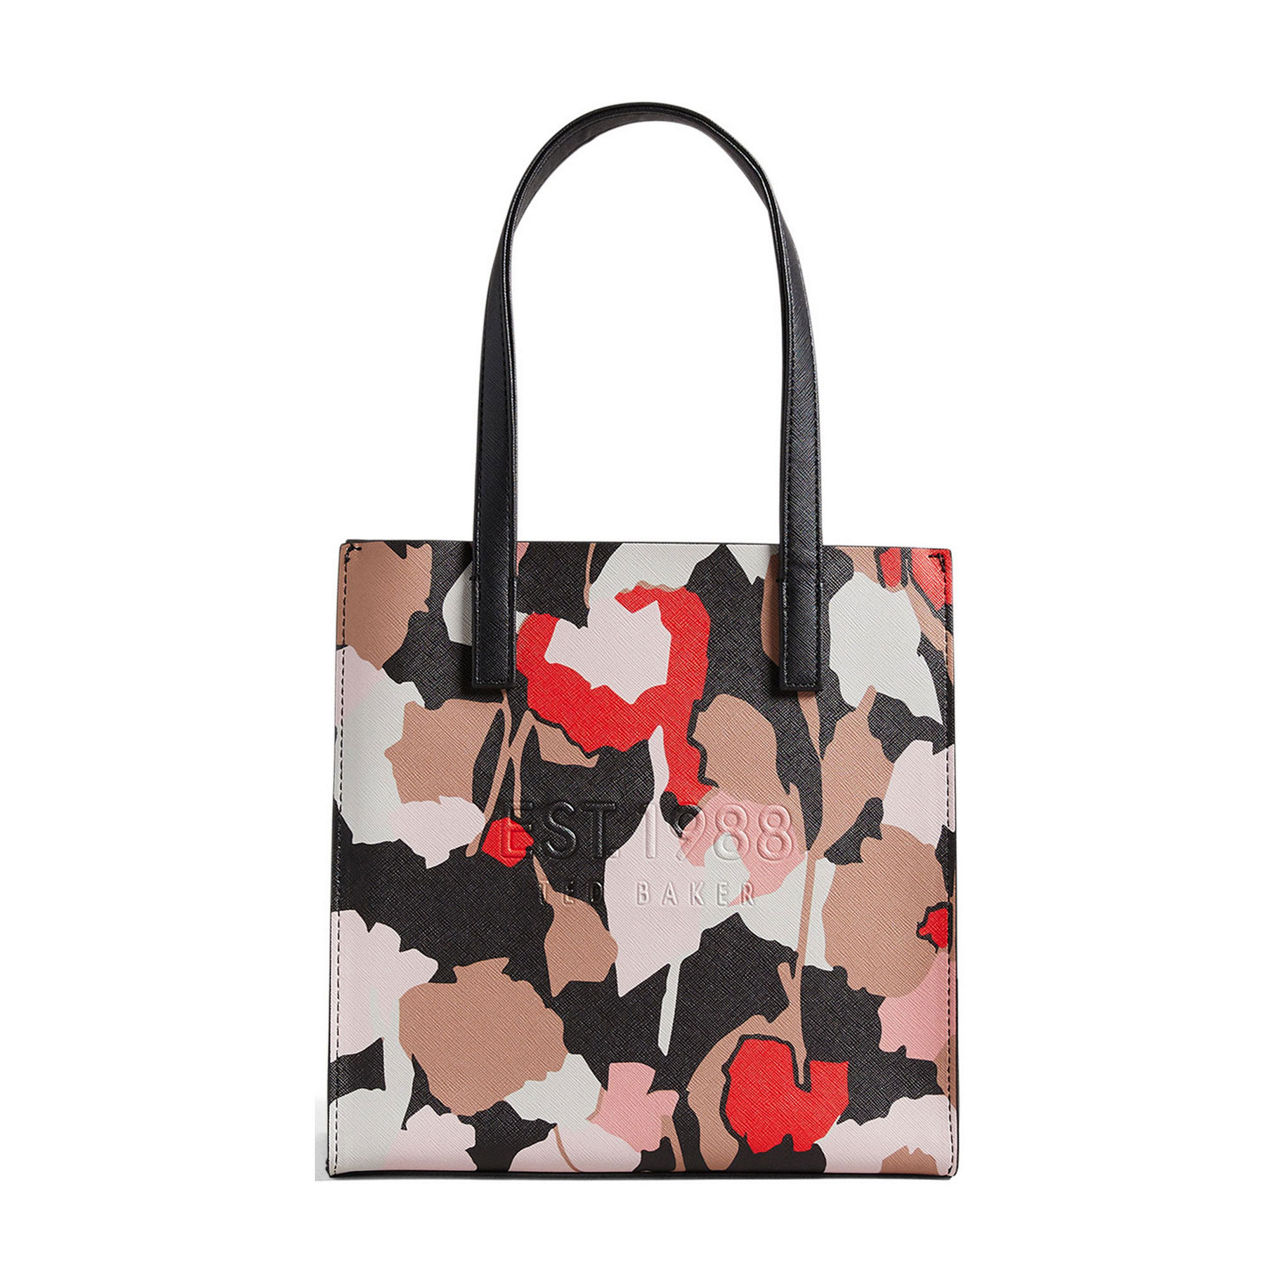 The true story of Slendrina  True stories, Ted baker icon bag